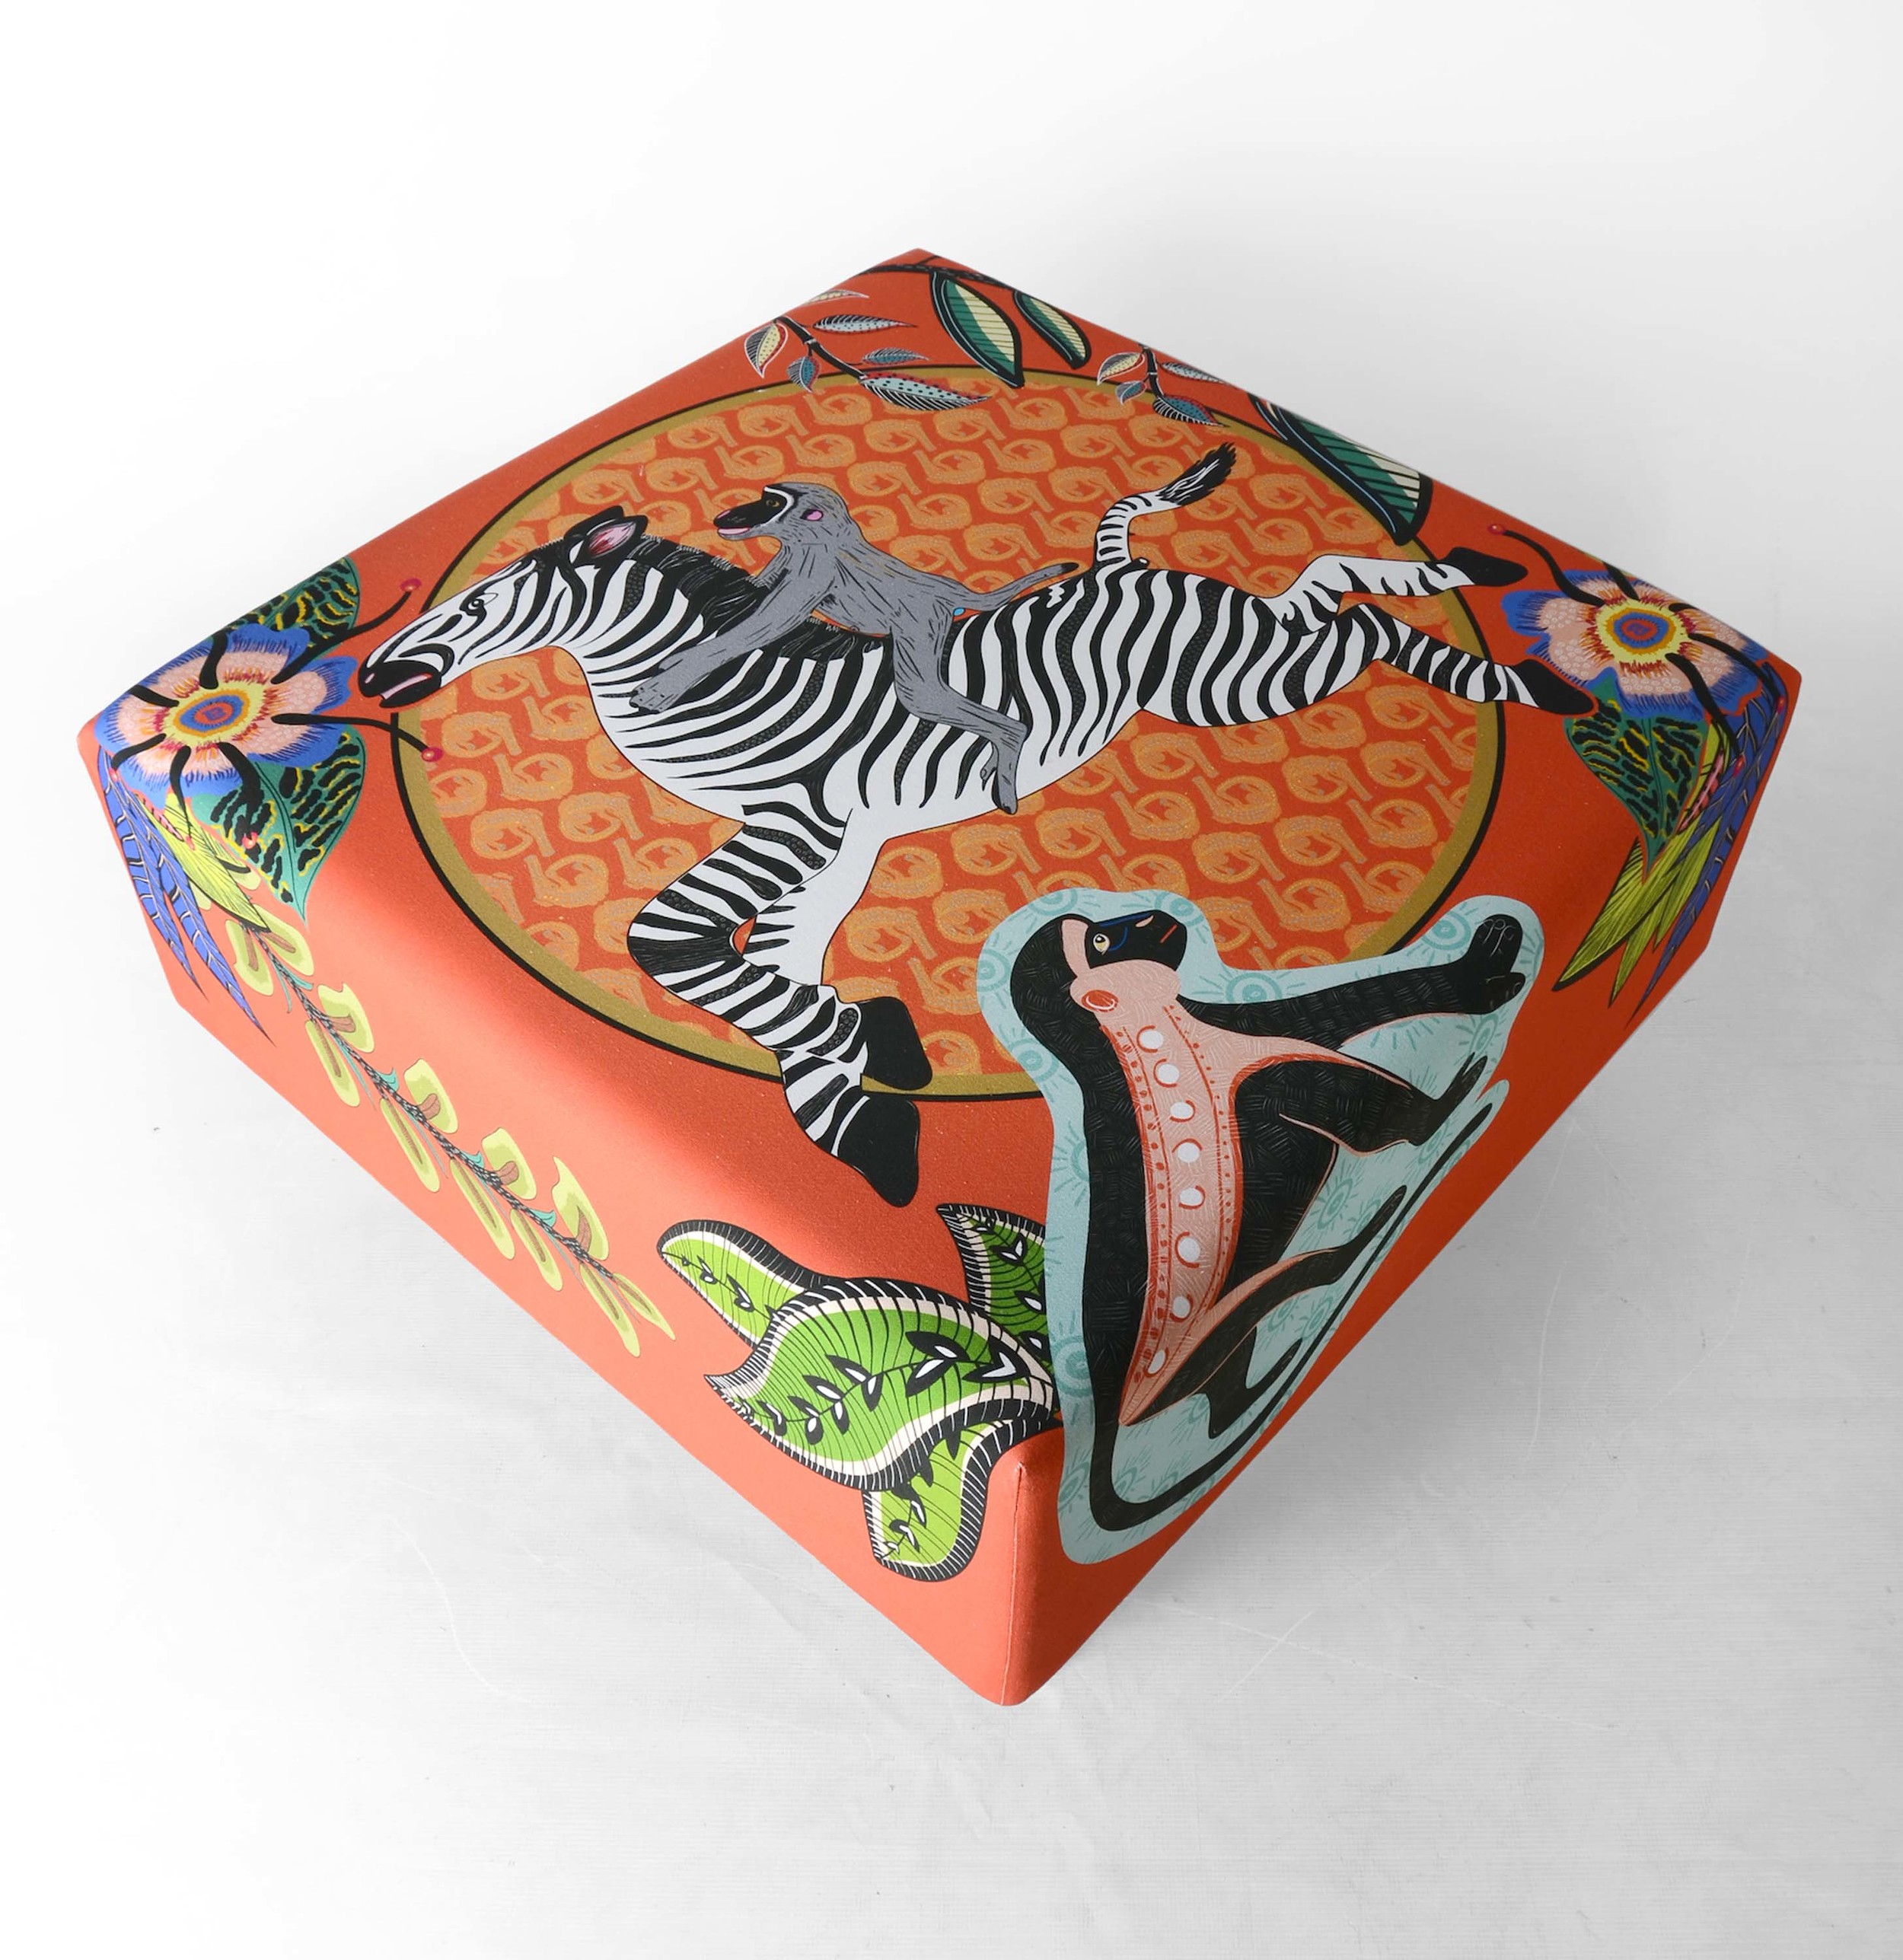 Qalakabusha Ottoman, complete with cheeky monkeys: perfect for the playroom